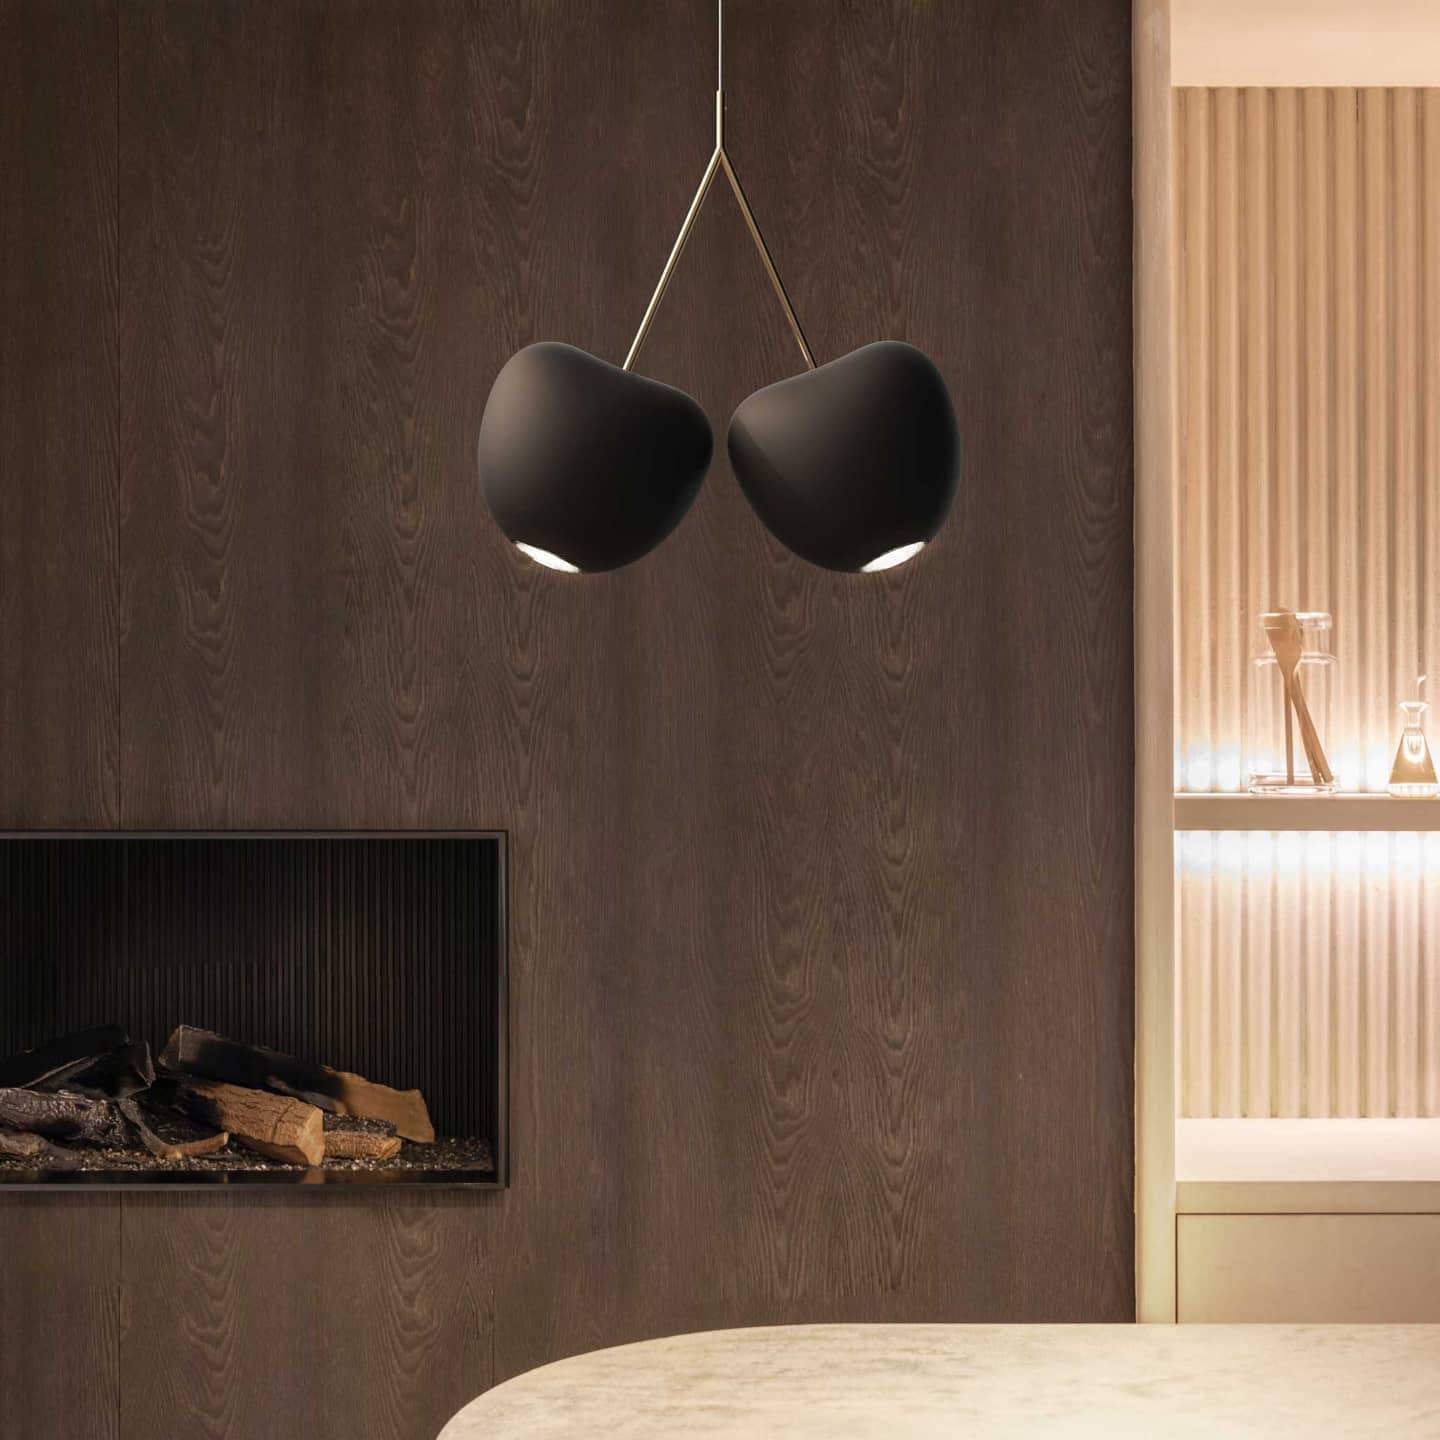 Cherry lamps from Qeeboo is a designer ceiling lamp, designed by Nina Zupanc. Intriguing, original and captivating shape. It will catch the eye of every guest, and its unusual design will be the icing on your cake. This amazing project was created from recycling.